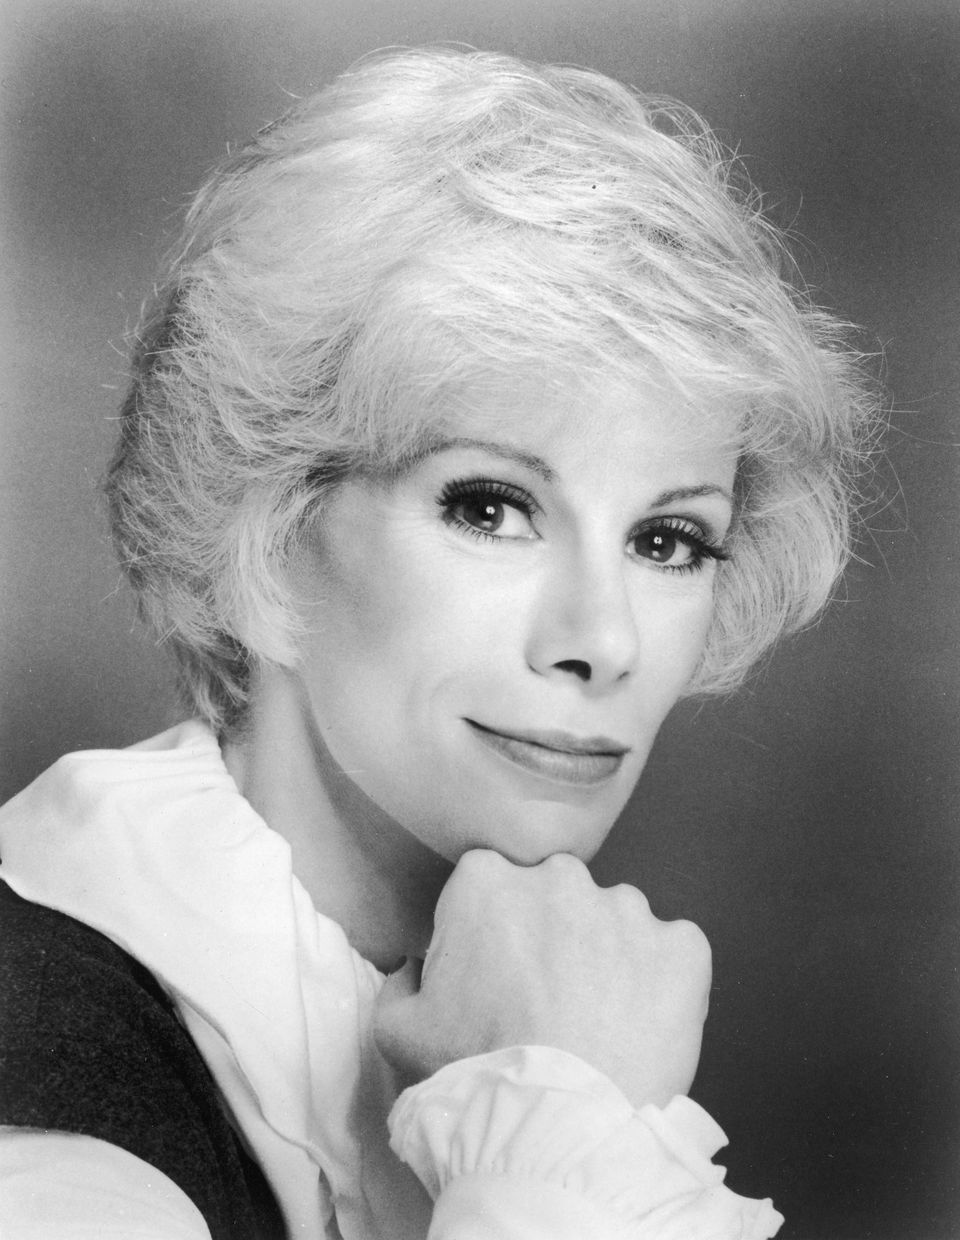 "<a href="http://www.theguardian.com/stage/2012/aug/09/comedy-gold-joan-rivers" role="link" class=" js-entry-link cet-external-link" data-vars-item-name="I hate thin people" data-vars-item-type="text" data-vars-unit-name="5c9a8b85e4b012c156659c64" data-vars-unit-type="buzz_body" data-vars-target-content-id="http://www.theguardian.com/stage/2012/aug/09/comedy-gold-joan-rivers" data-vars-target-content-type="url" data-vars-type="web_external_link" data-vars-subunit-name="before_you_go_slideshow" data-vars-subunit-type="component" data-vars-position-in-subunit="0">I hate thin people</a>; 'Oh, does the tampon make me look fat?'"